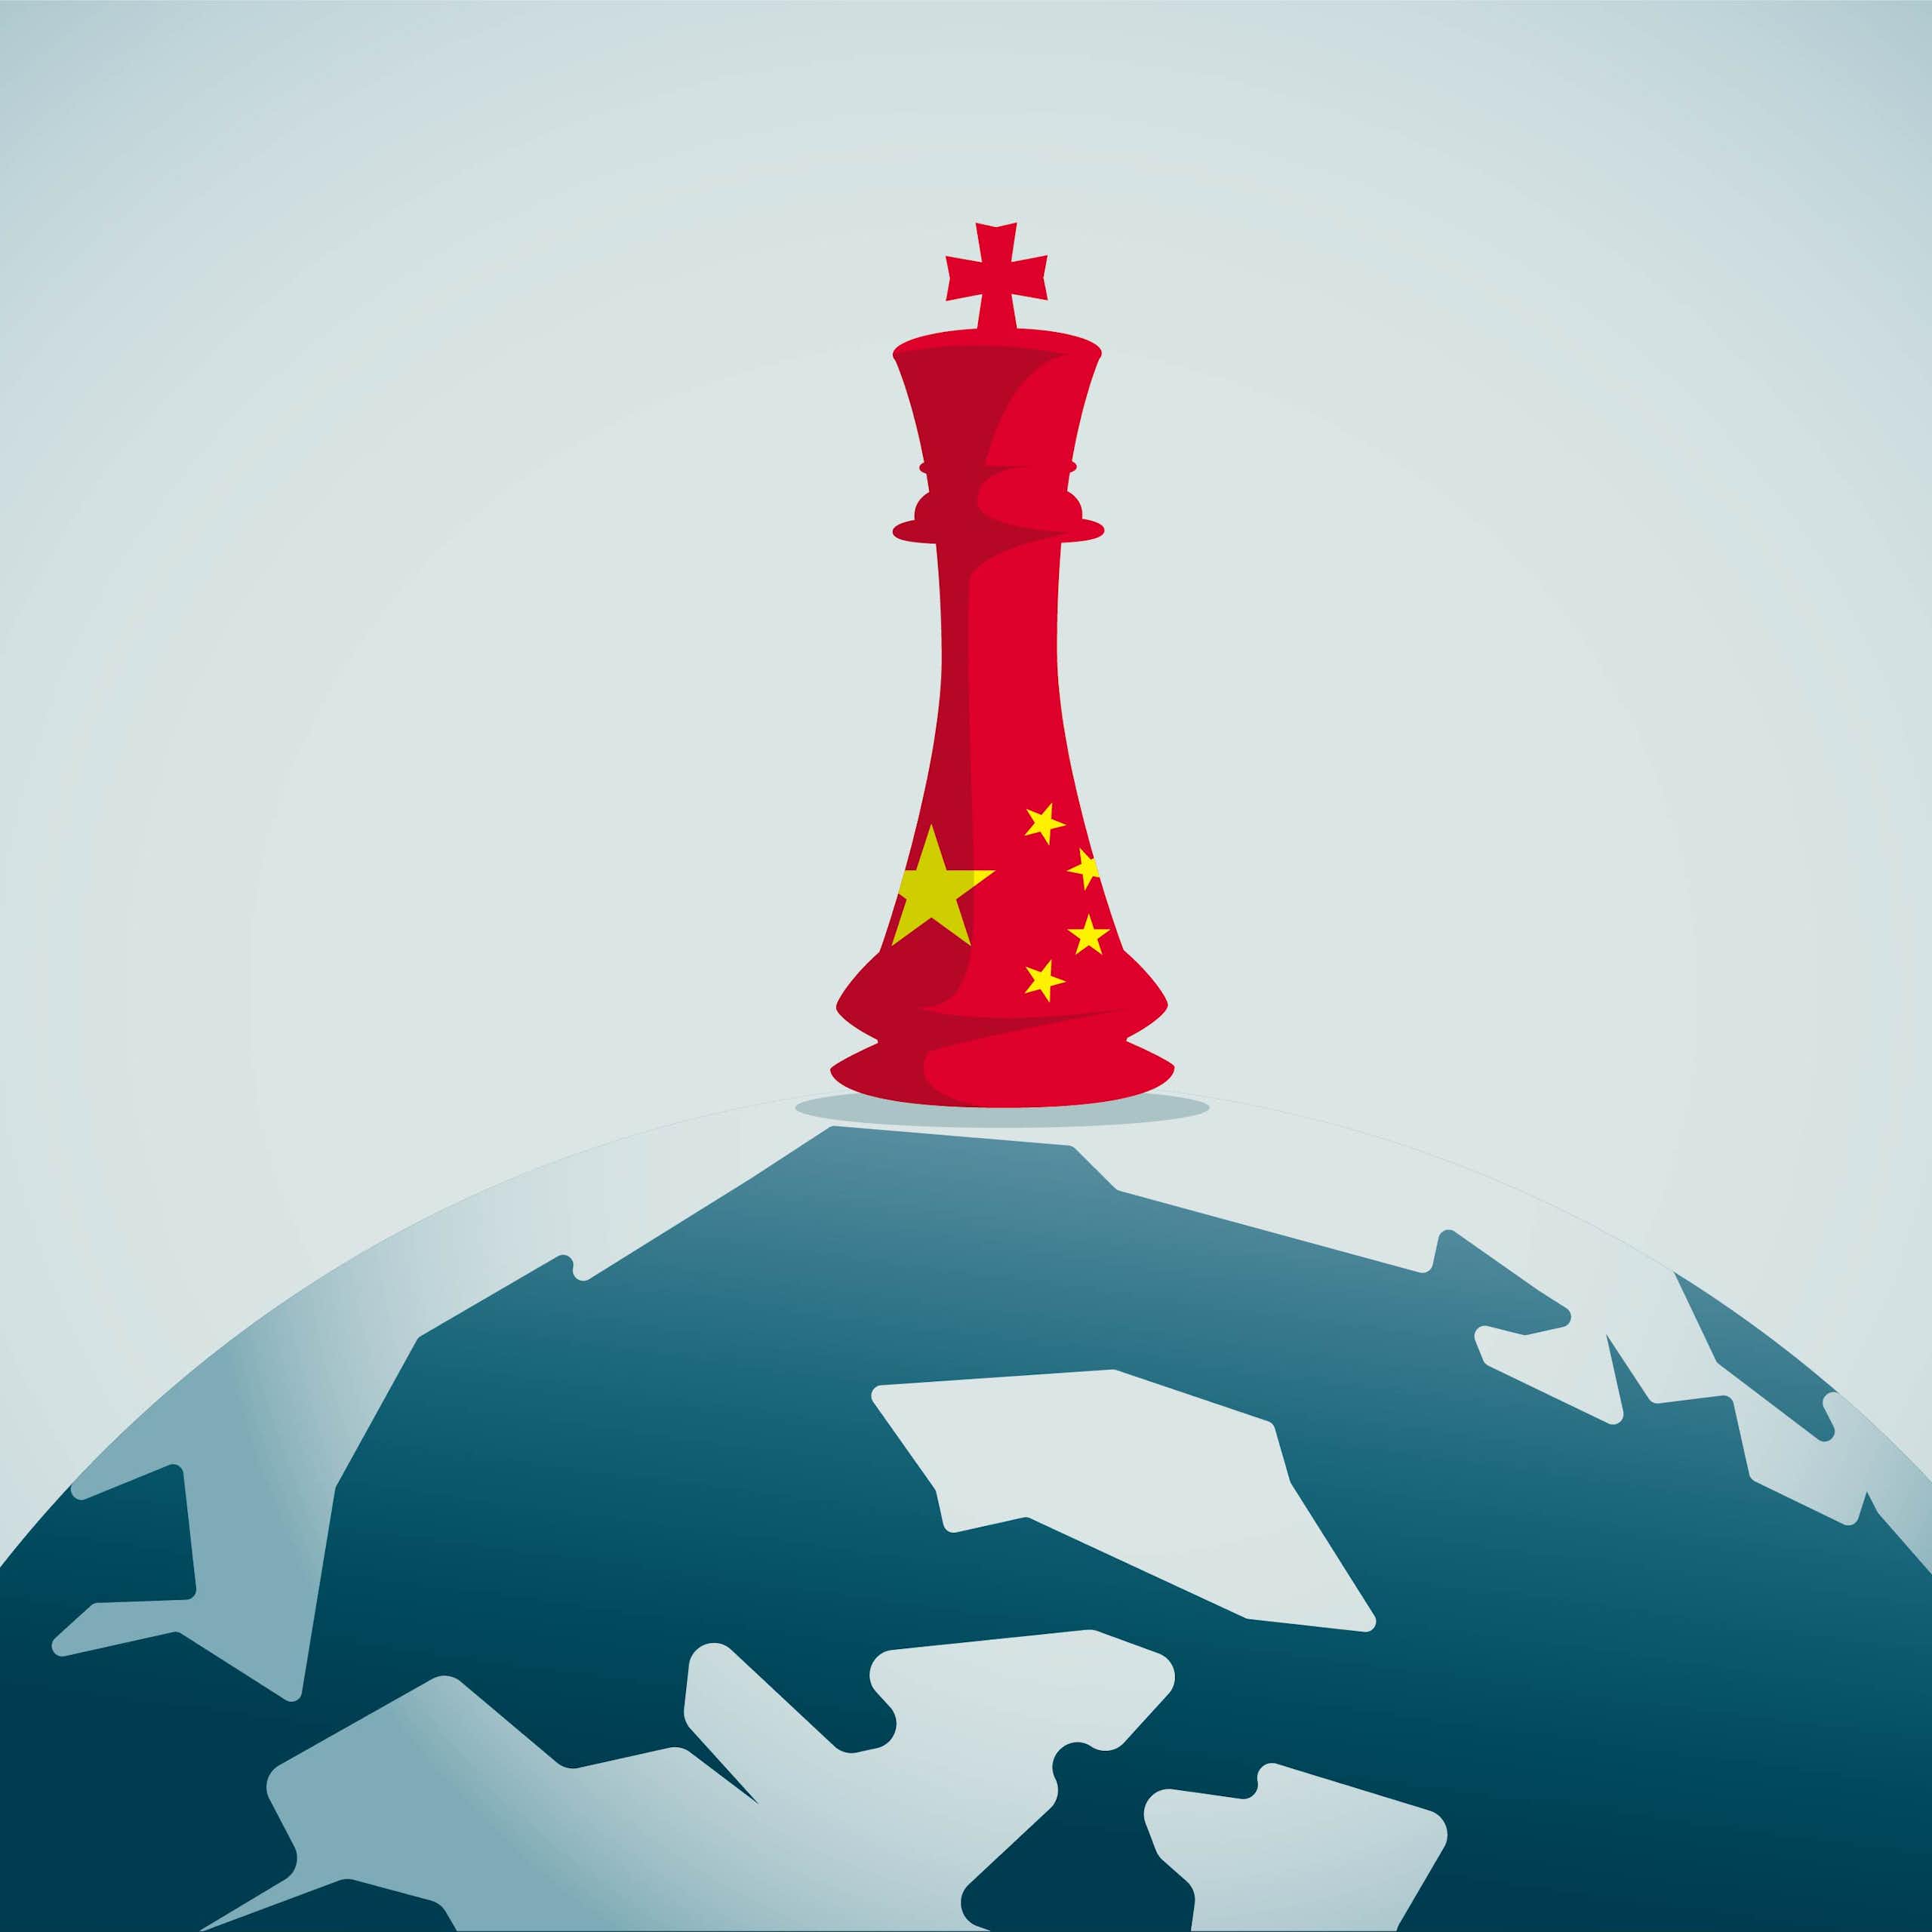 A king chess piece in Chinese red and yellow flag design sits on top of a animated world.